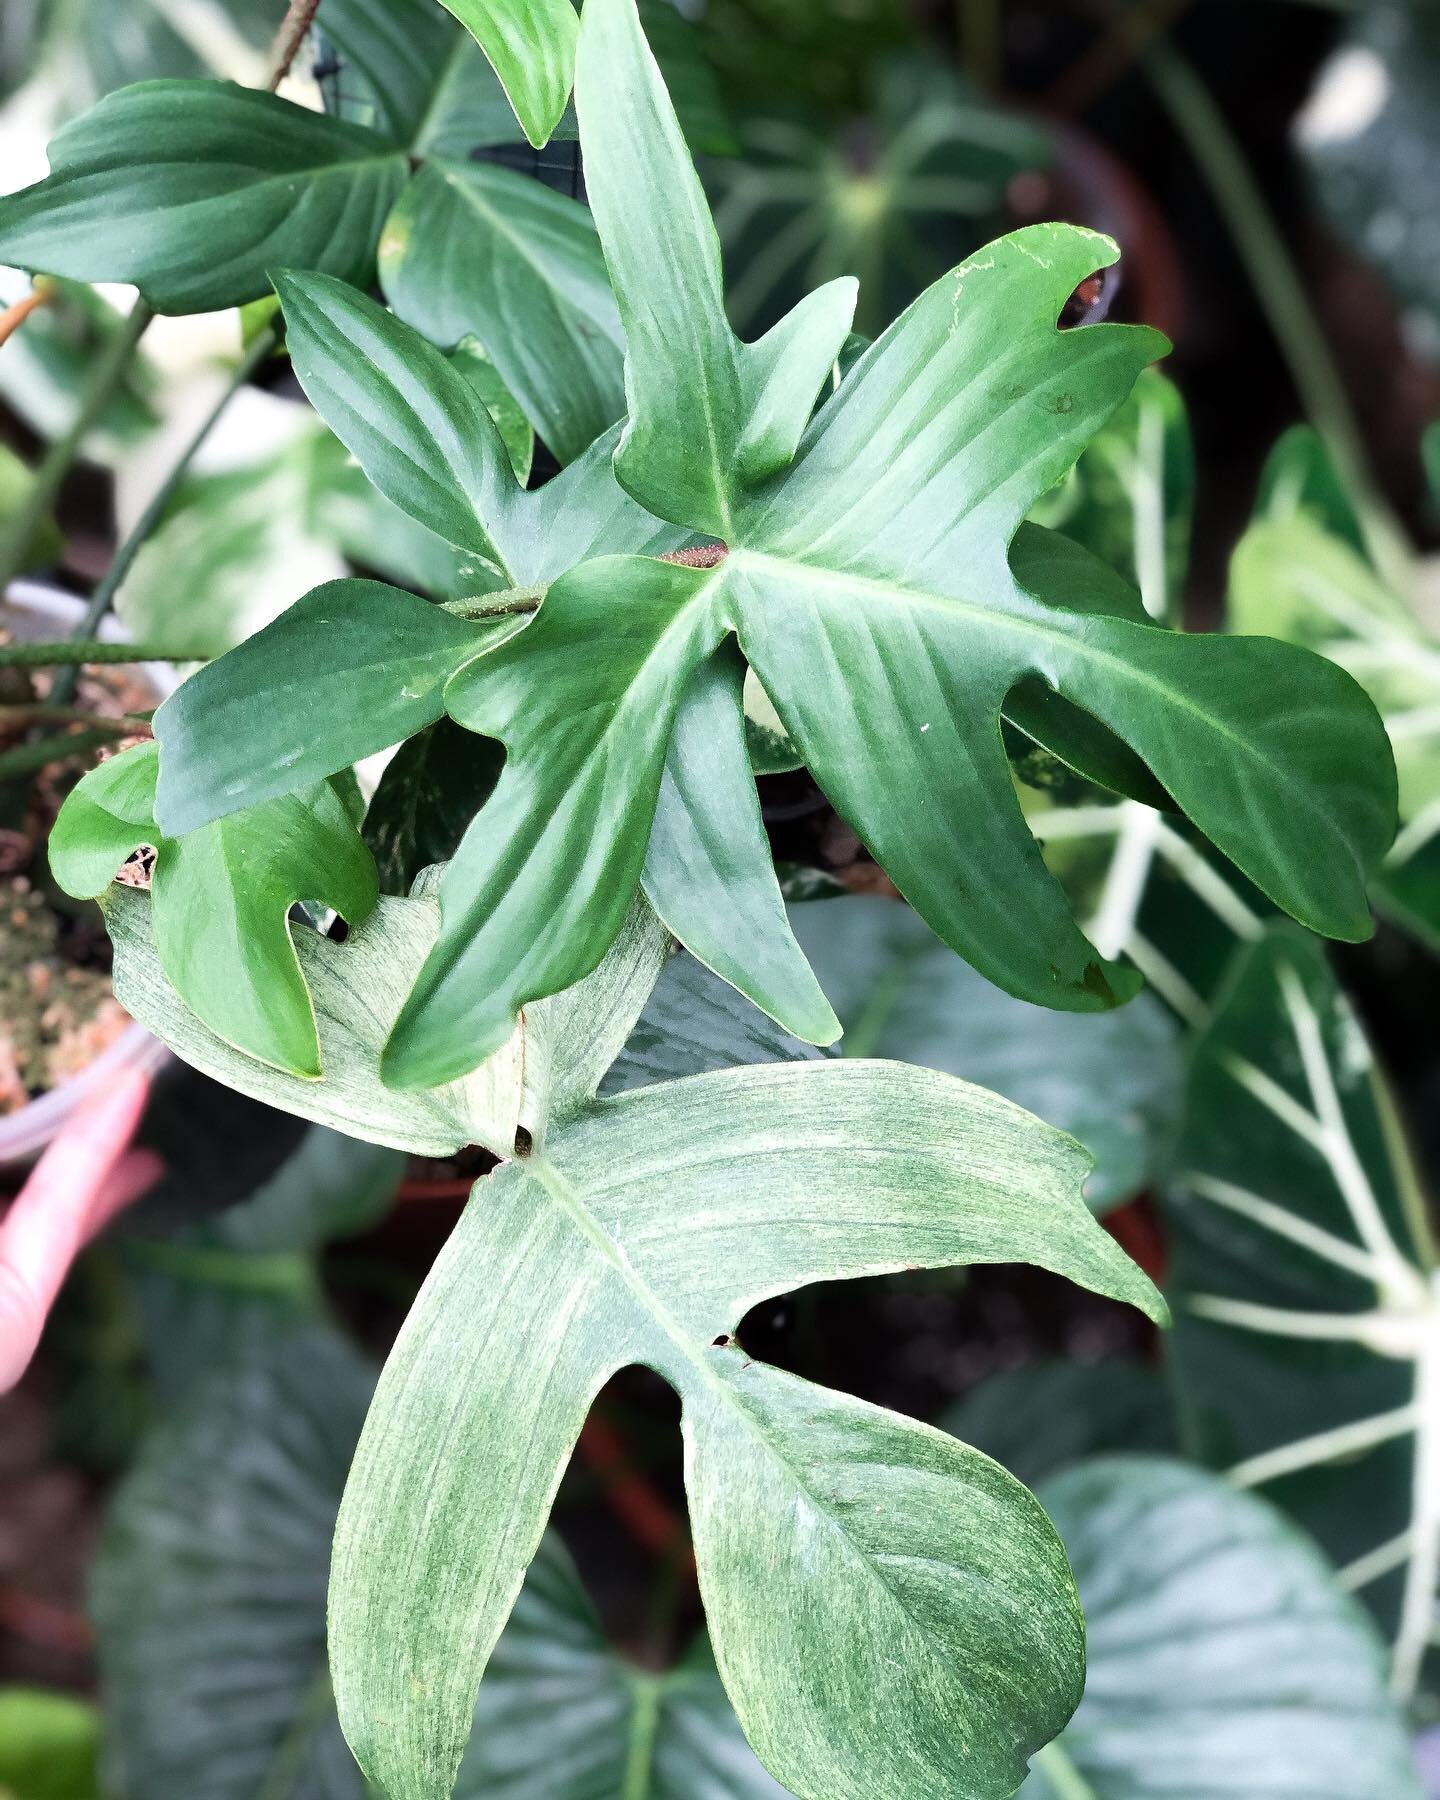 What&rsquo;s next up for Philodendron Week&hellip;

P H I L O D E N D R O N
F L O R I D A 
G H O S T 👻

Honestly one of my favourites for its&rsquo; unusual shape and amazing colour change from white to green. Truly it is an incredible plant that I 